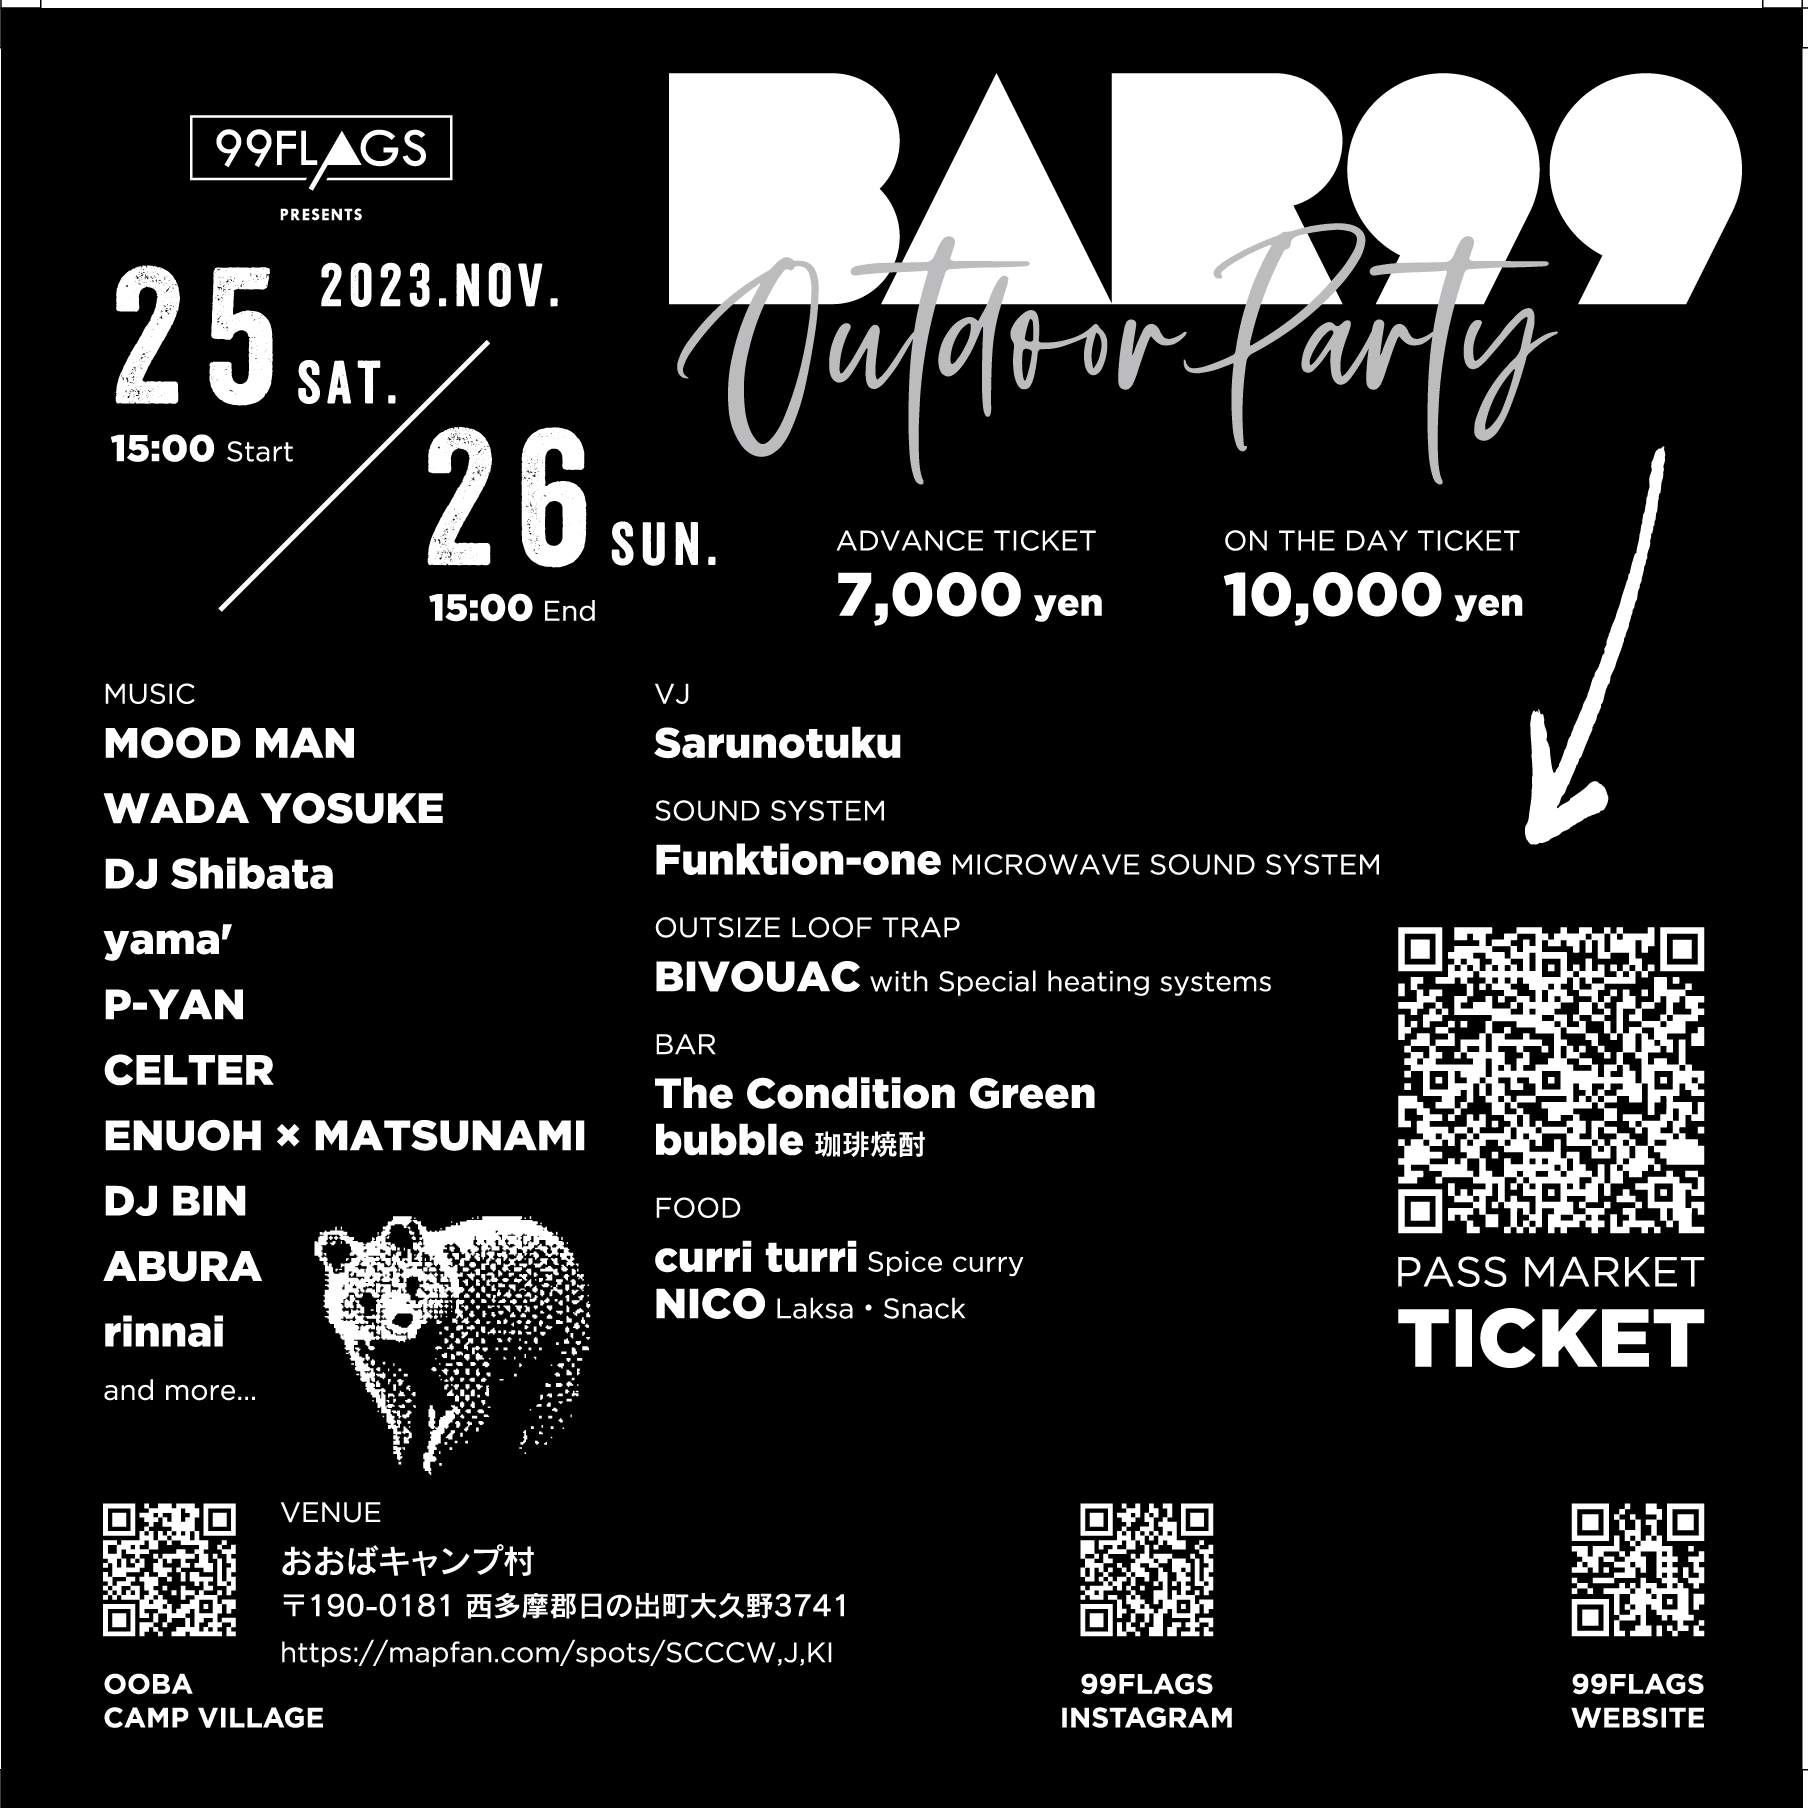 99FLAGS PRESENTS 'BAR99' OUTDOOR PARTY - フライヤー裏